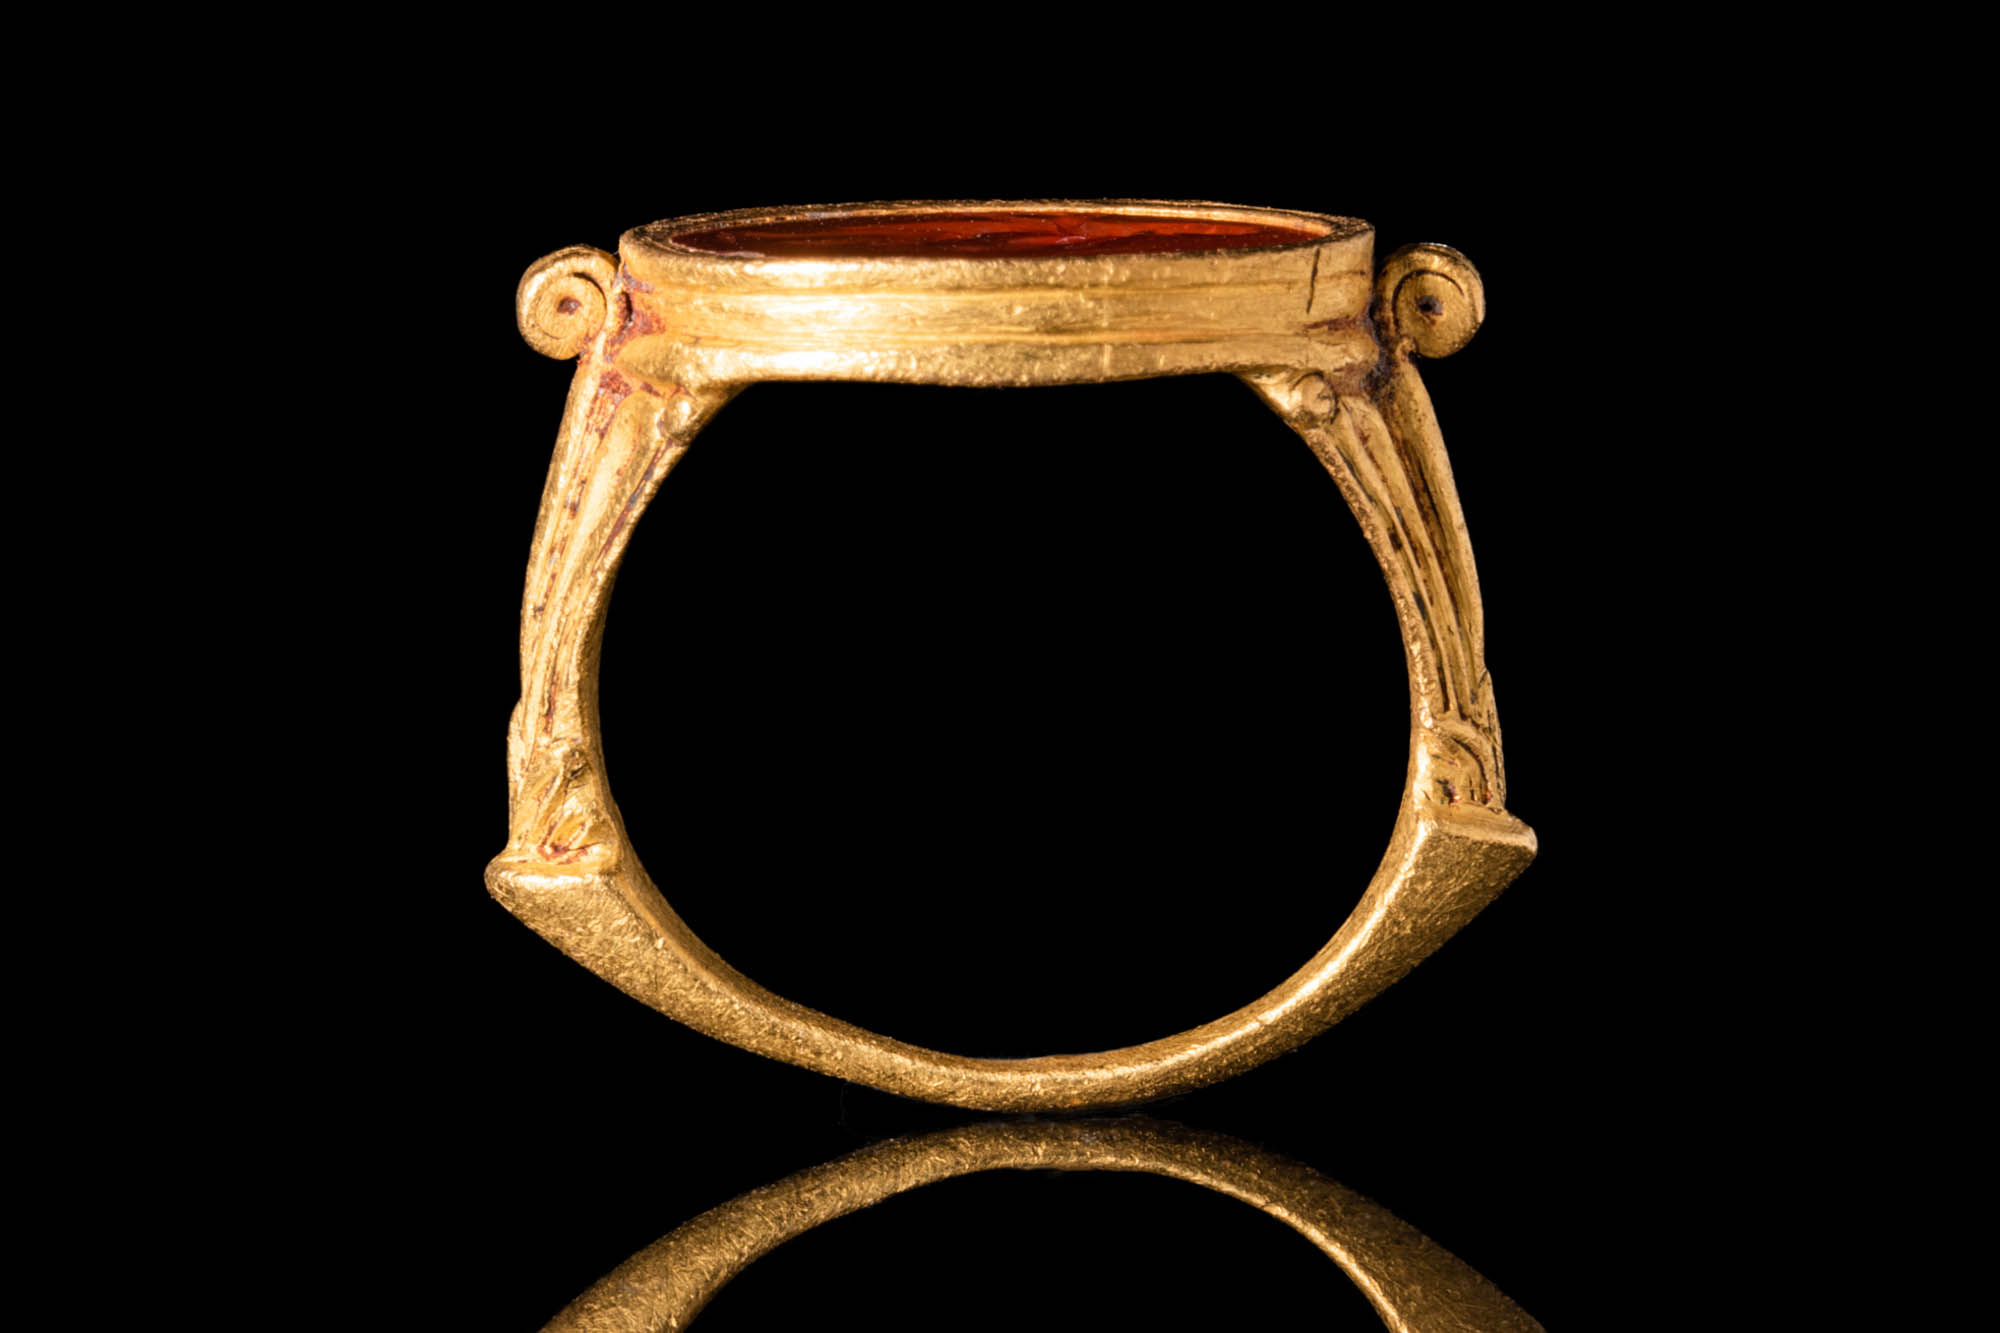 LATE ROMAN GOLD RING WITH INTAGLIO DEPICTING A SATYR - Image 5 of 5